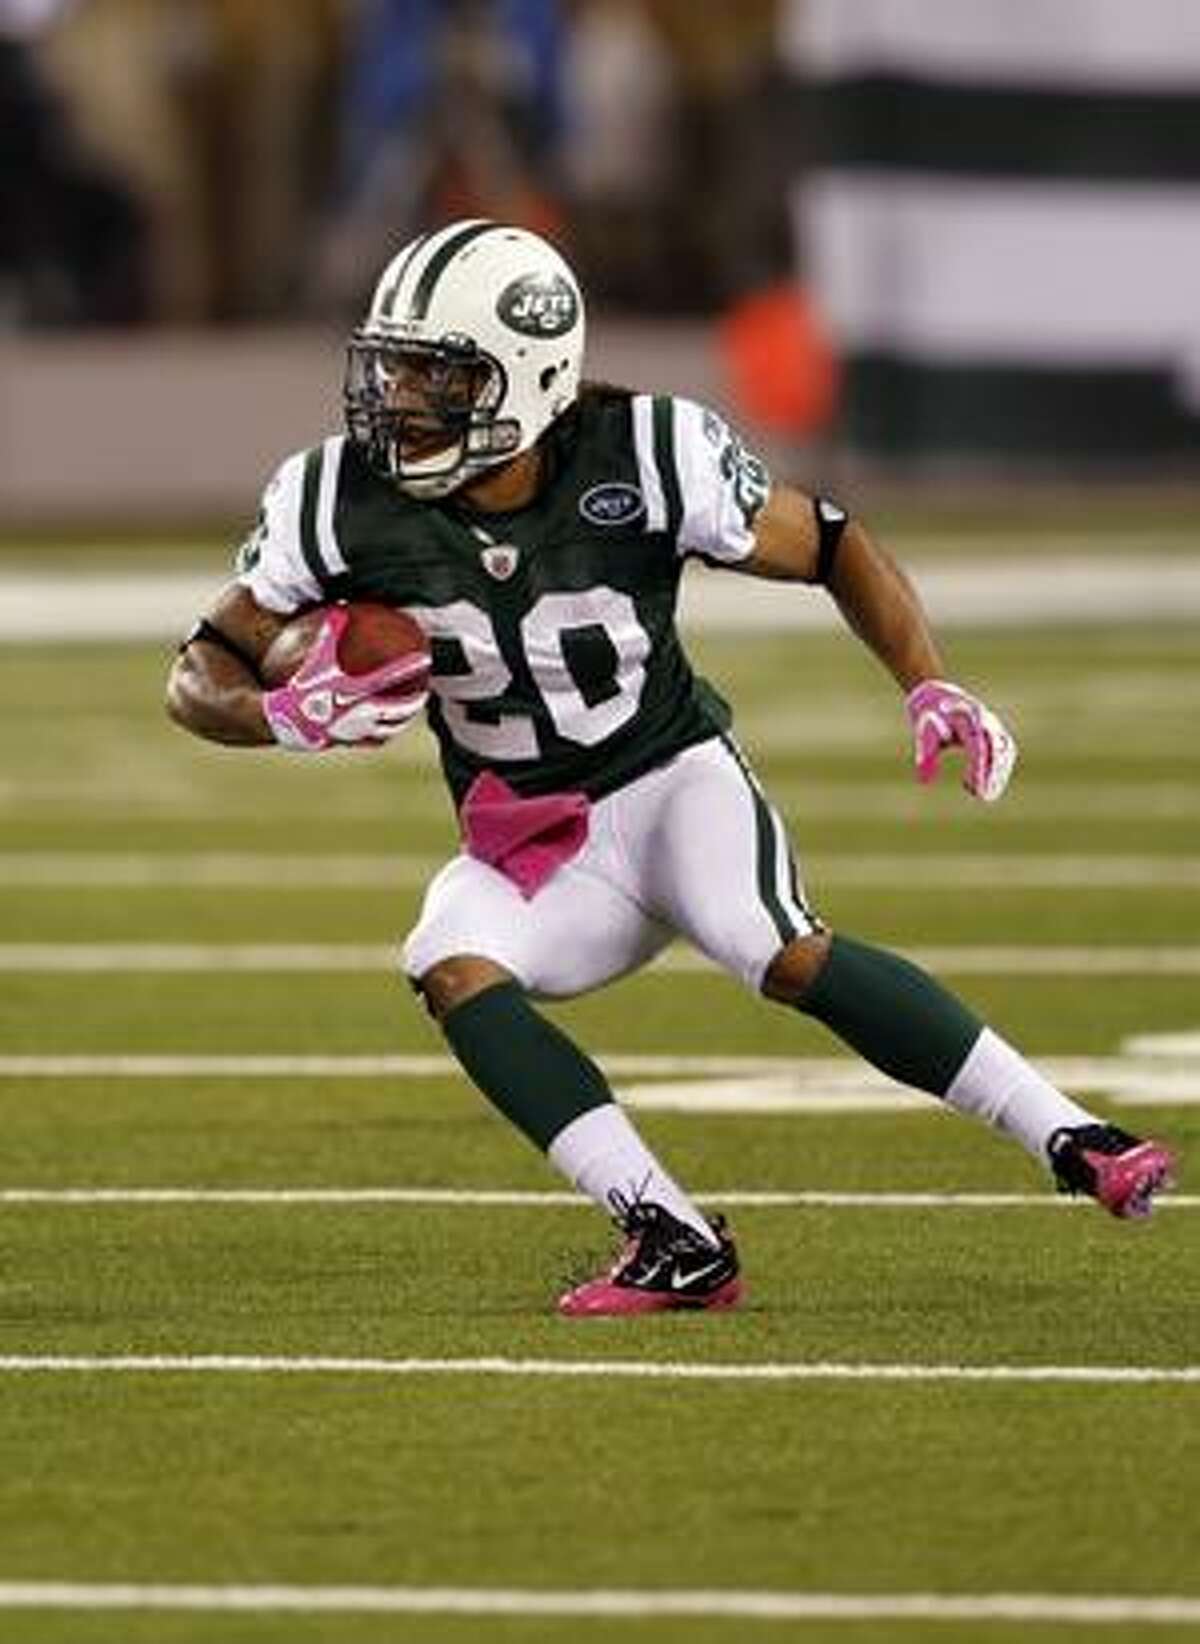 New York Jets punt returner Kyle Wilson (20) returns a punt during the NFL week 5 ESPN Monday Night Football game against the Minnesota Vikings on Monday, October 11, 2010 in East Rutherford, New Jersey. The Jets won the game 29-20. (AP Photo/Paul Spinelli)